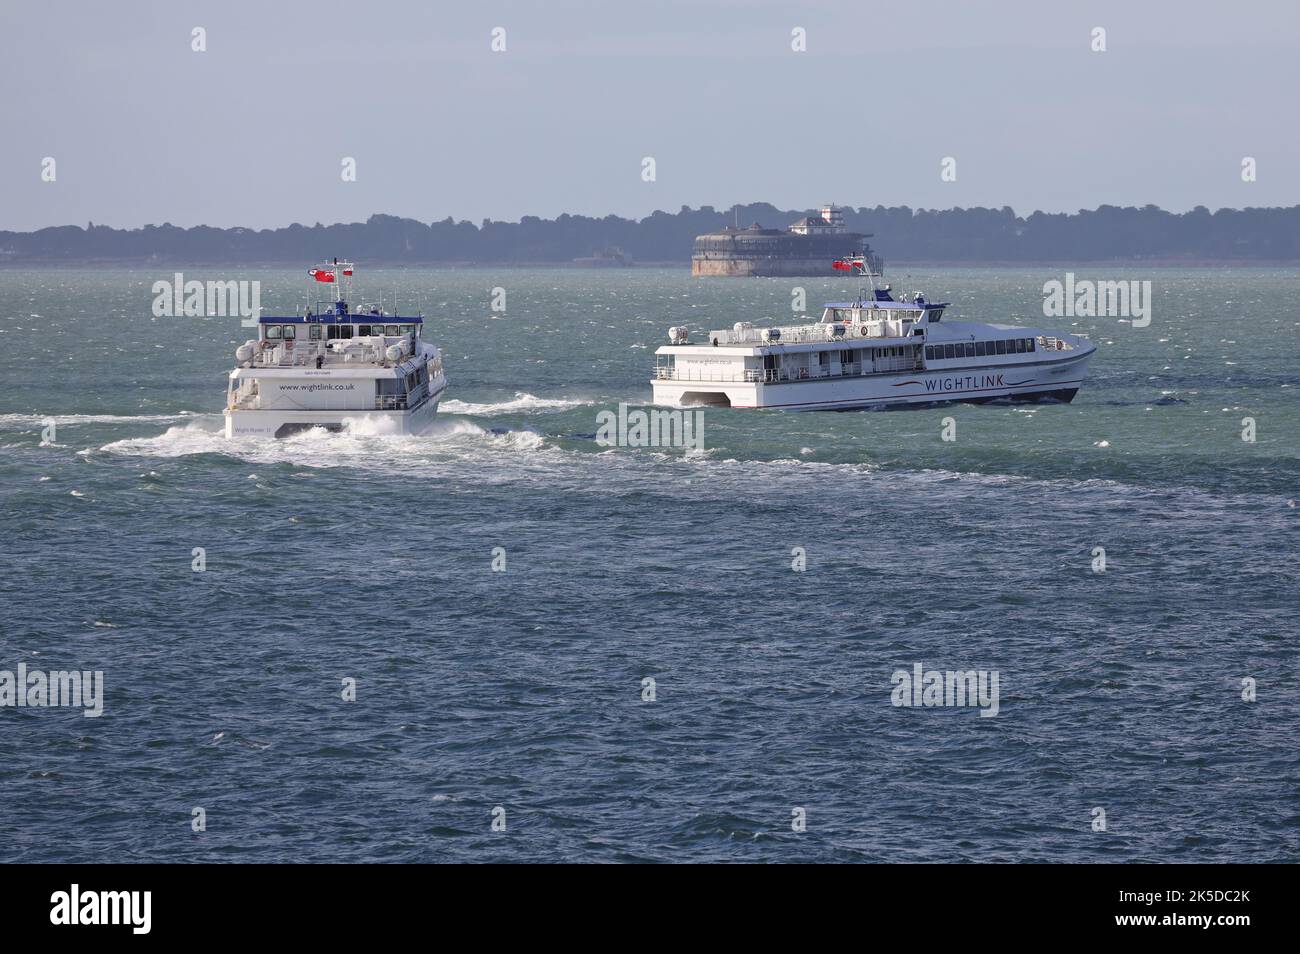 The Wightlink passenger ferries WIGHT RYDER I and II head towards the Isle of Wight Stock Photo